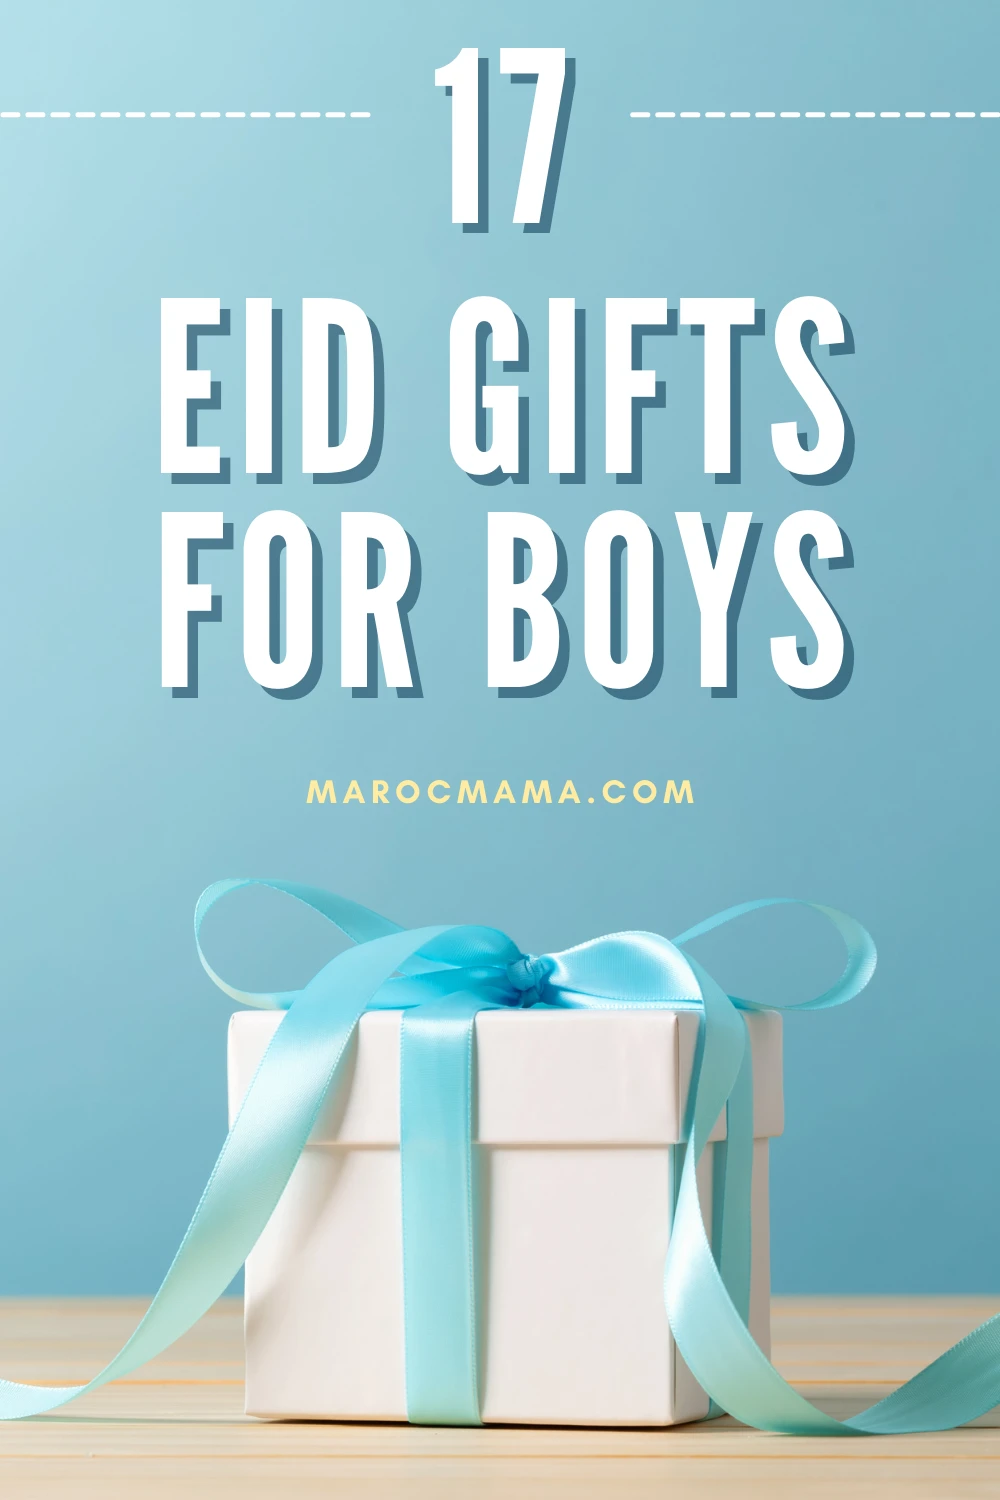 White gift box with light blue ribbon on light blue background with the text 17 Eid Gifts for Boys